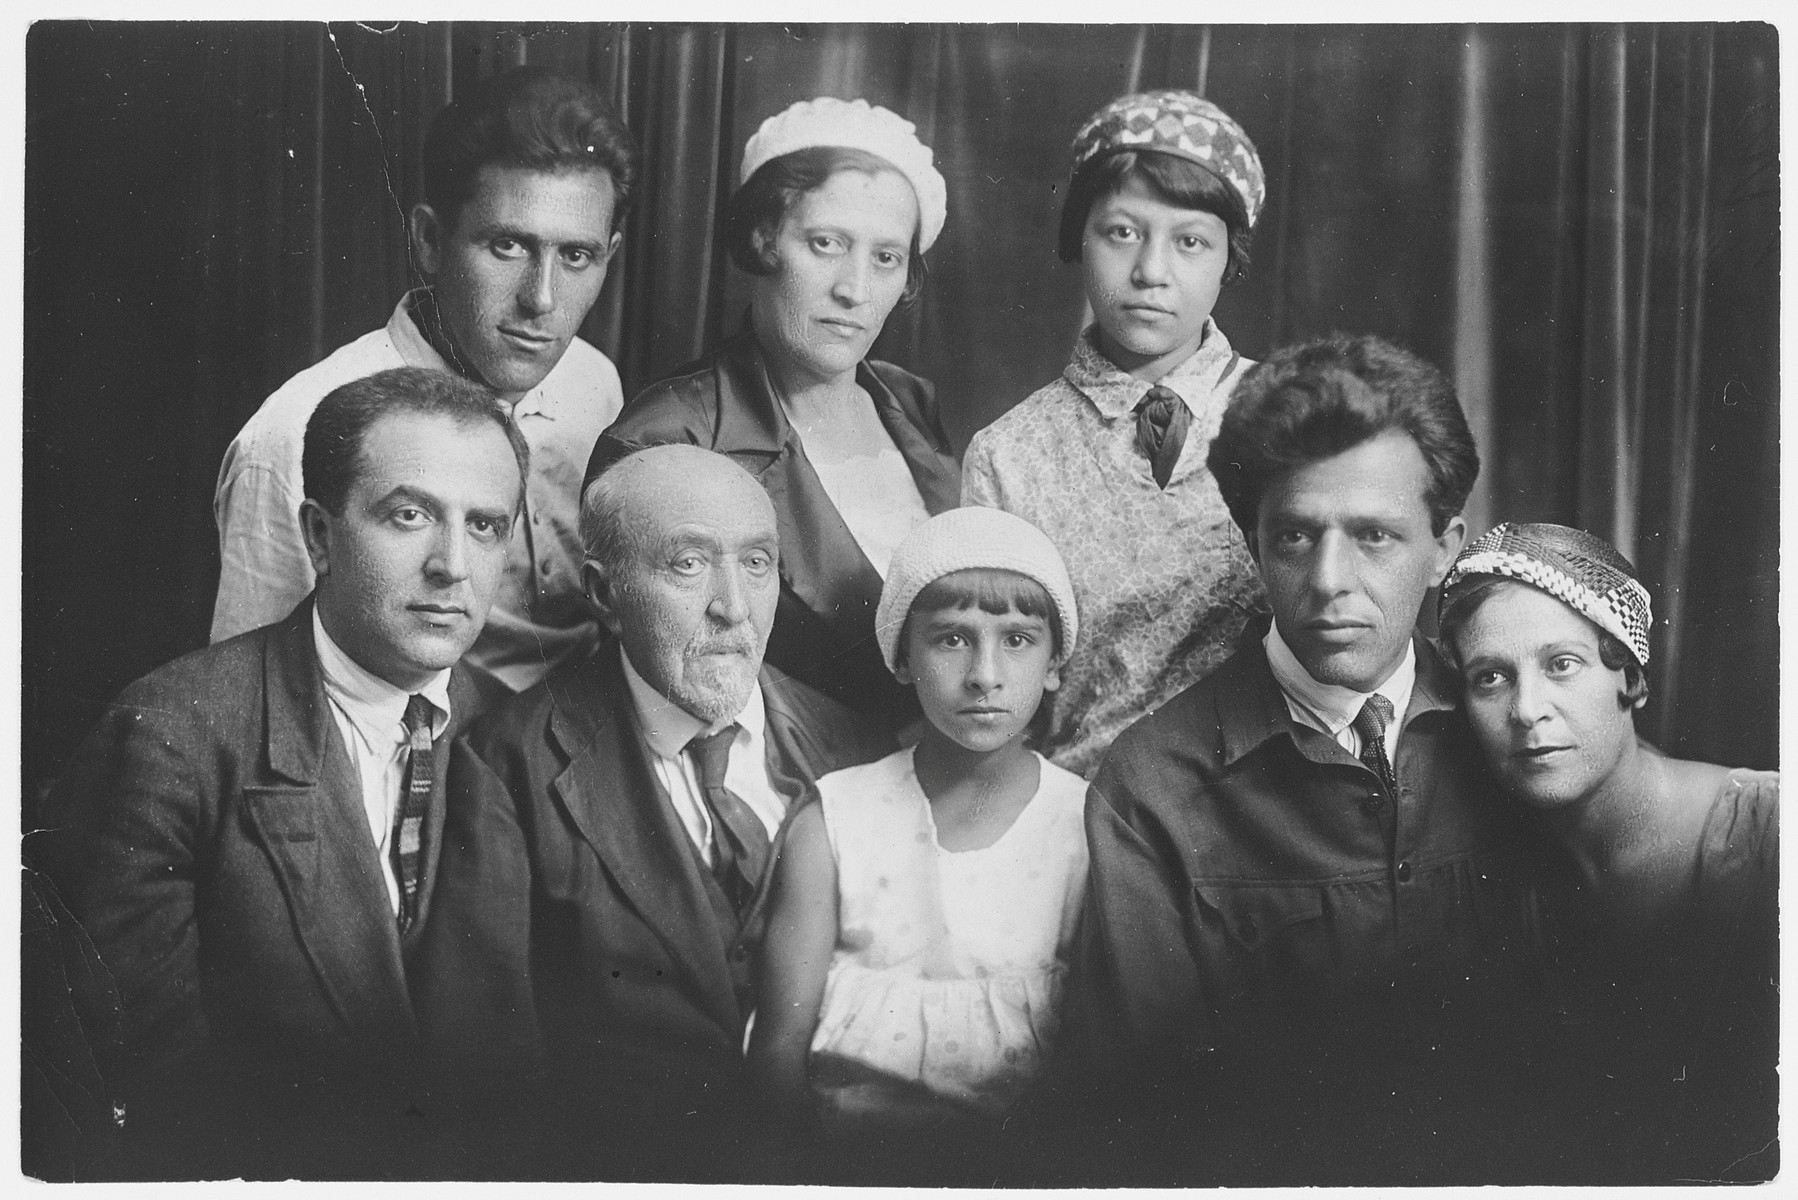 Studio portrait of the Pevsner family.

Pictured from left to right are: (front row): Yefim, Nonno, Marco, Nora, Khonia and Olya Pevsner.  (back row): Naum, Anya and the daughter of Khonia and Olga Pevsner.